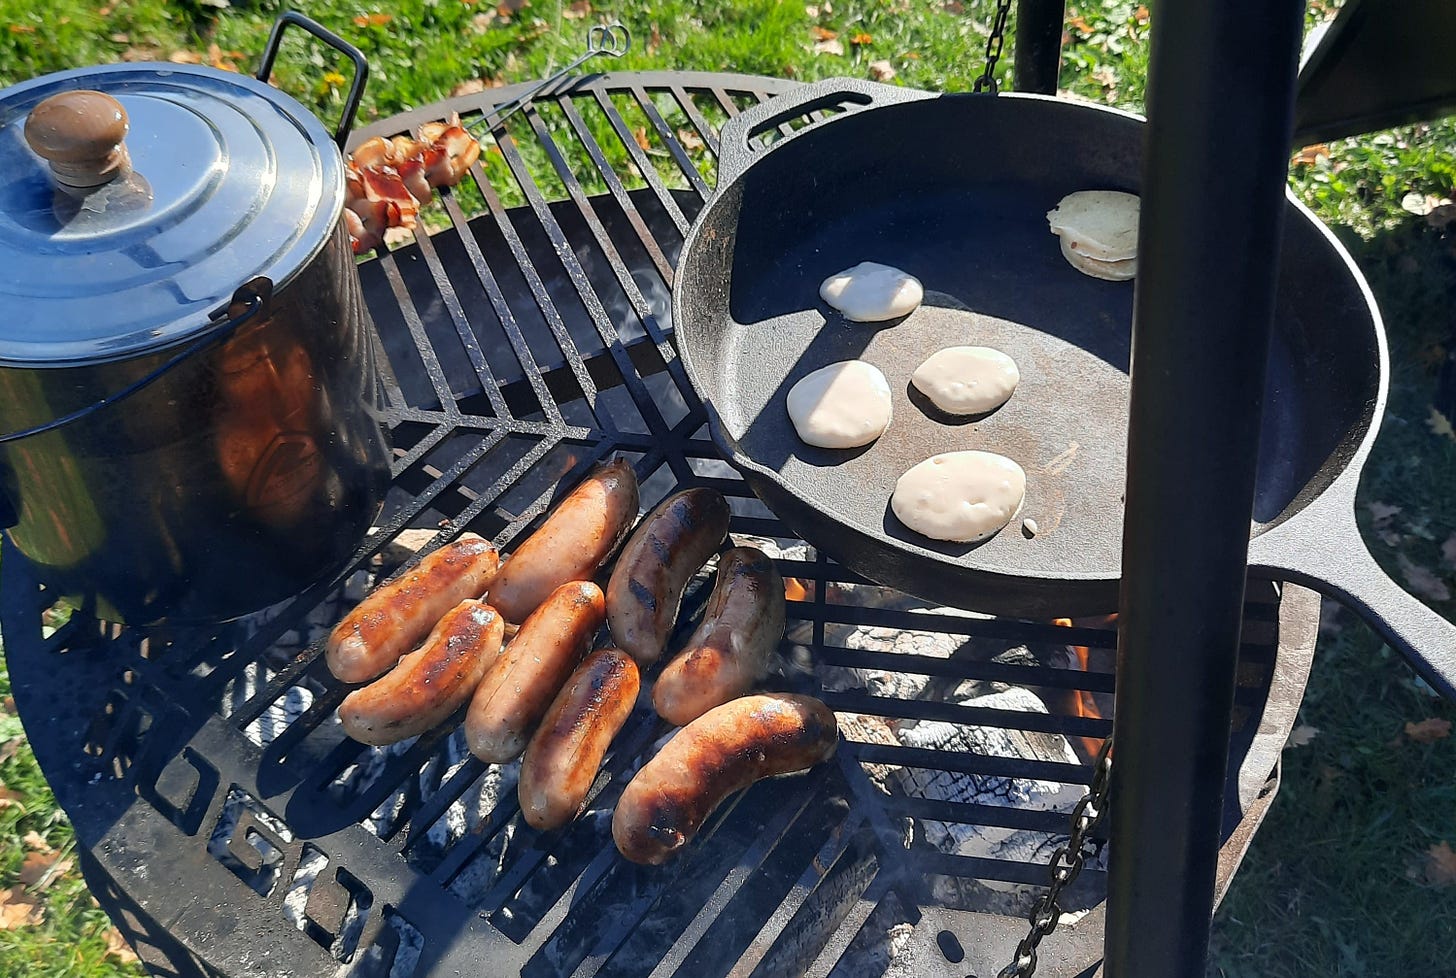 An outdoor firepit with sausages and pancakes cooking